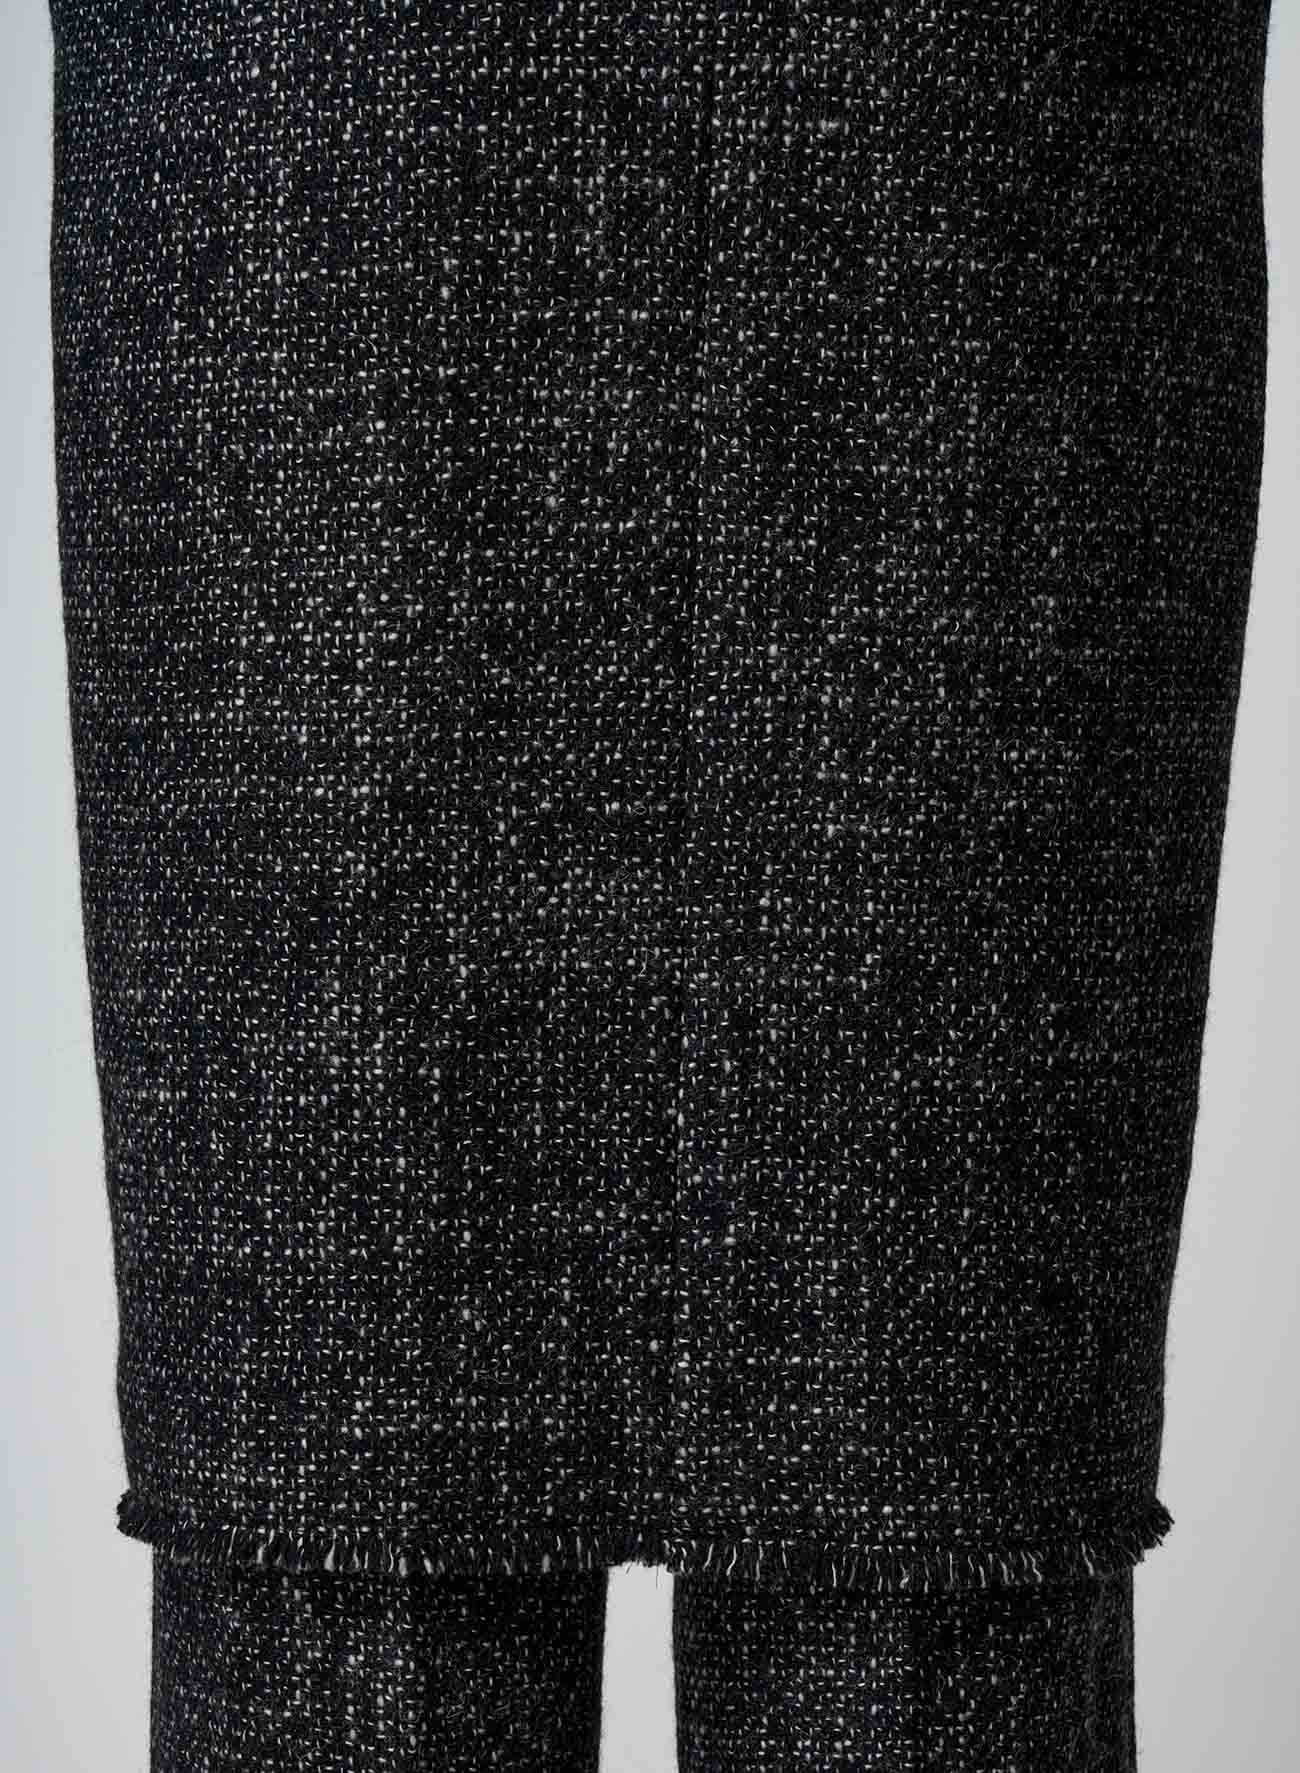 HANDWOVEN TWEED TIGHT OP WITH FLAP